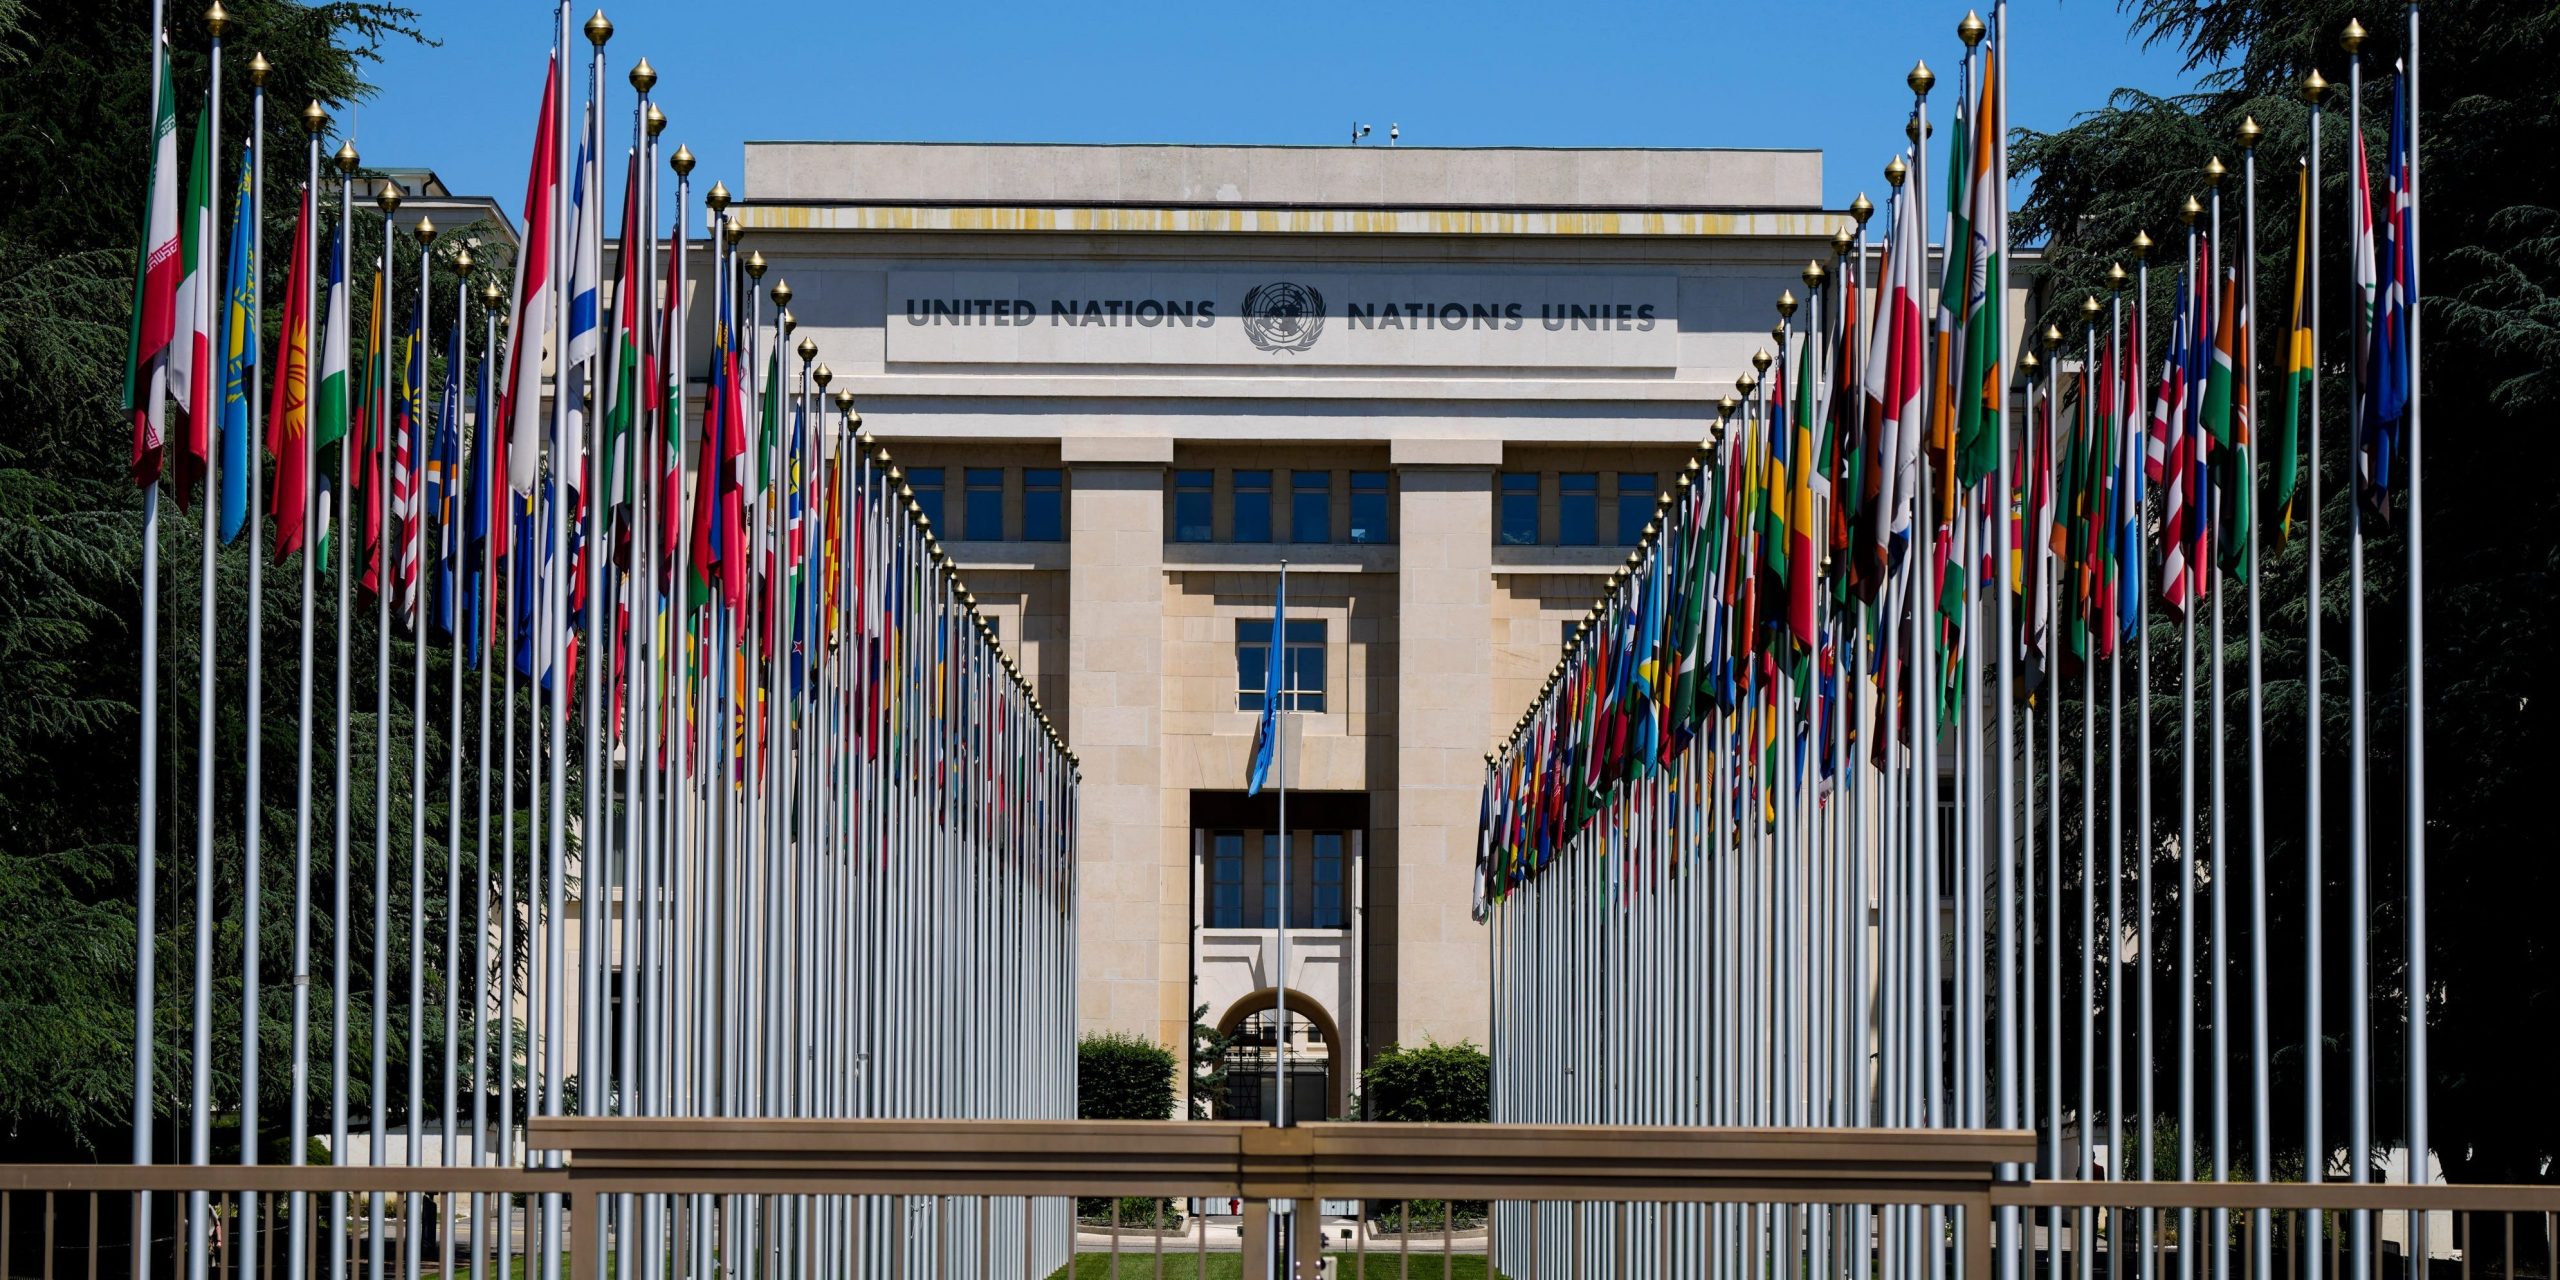 Flagpoles line in rows in front of a building of the United Nations in Geneva, Switzerland Monday, June 14, 2021.